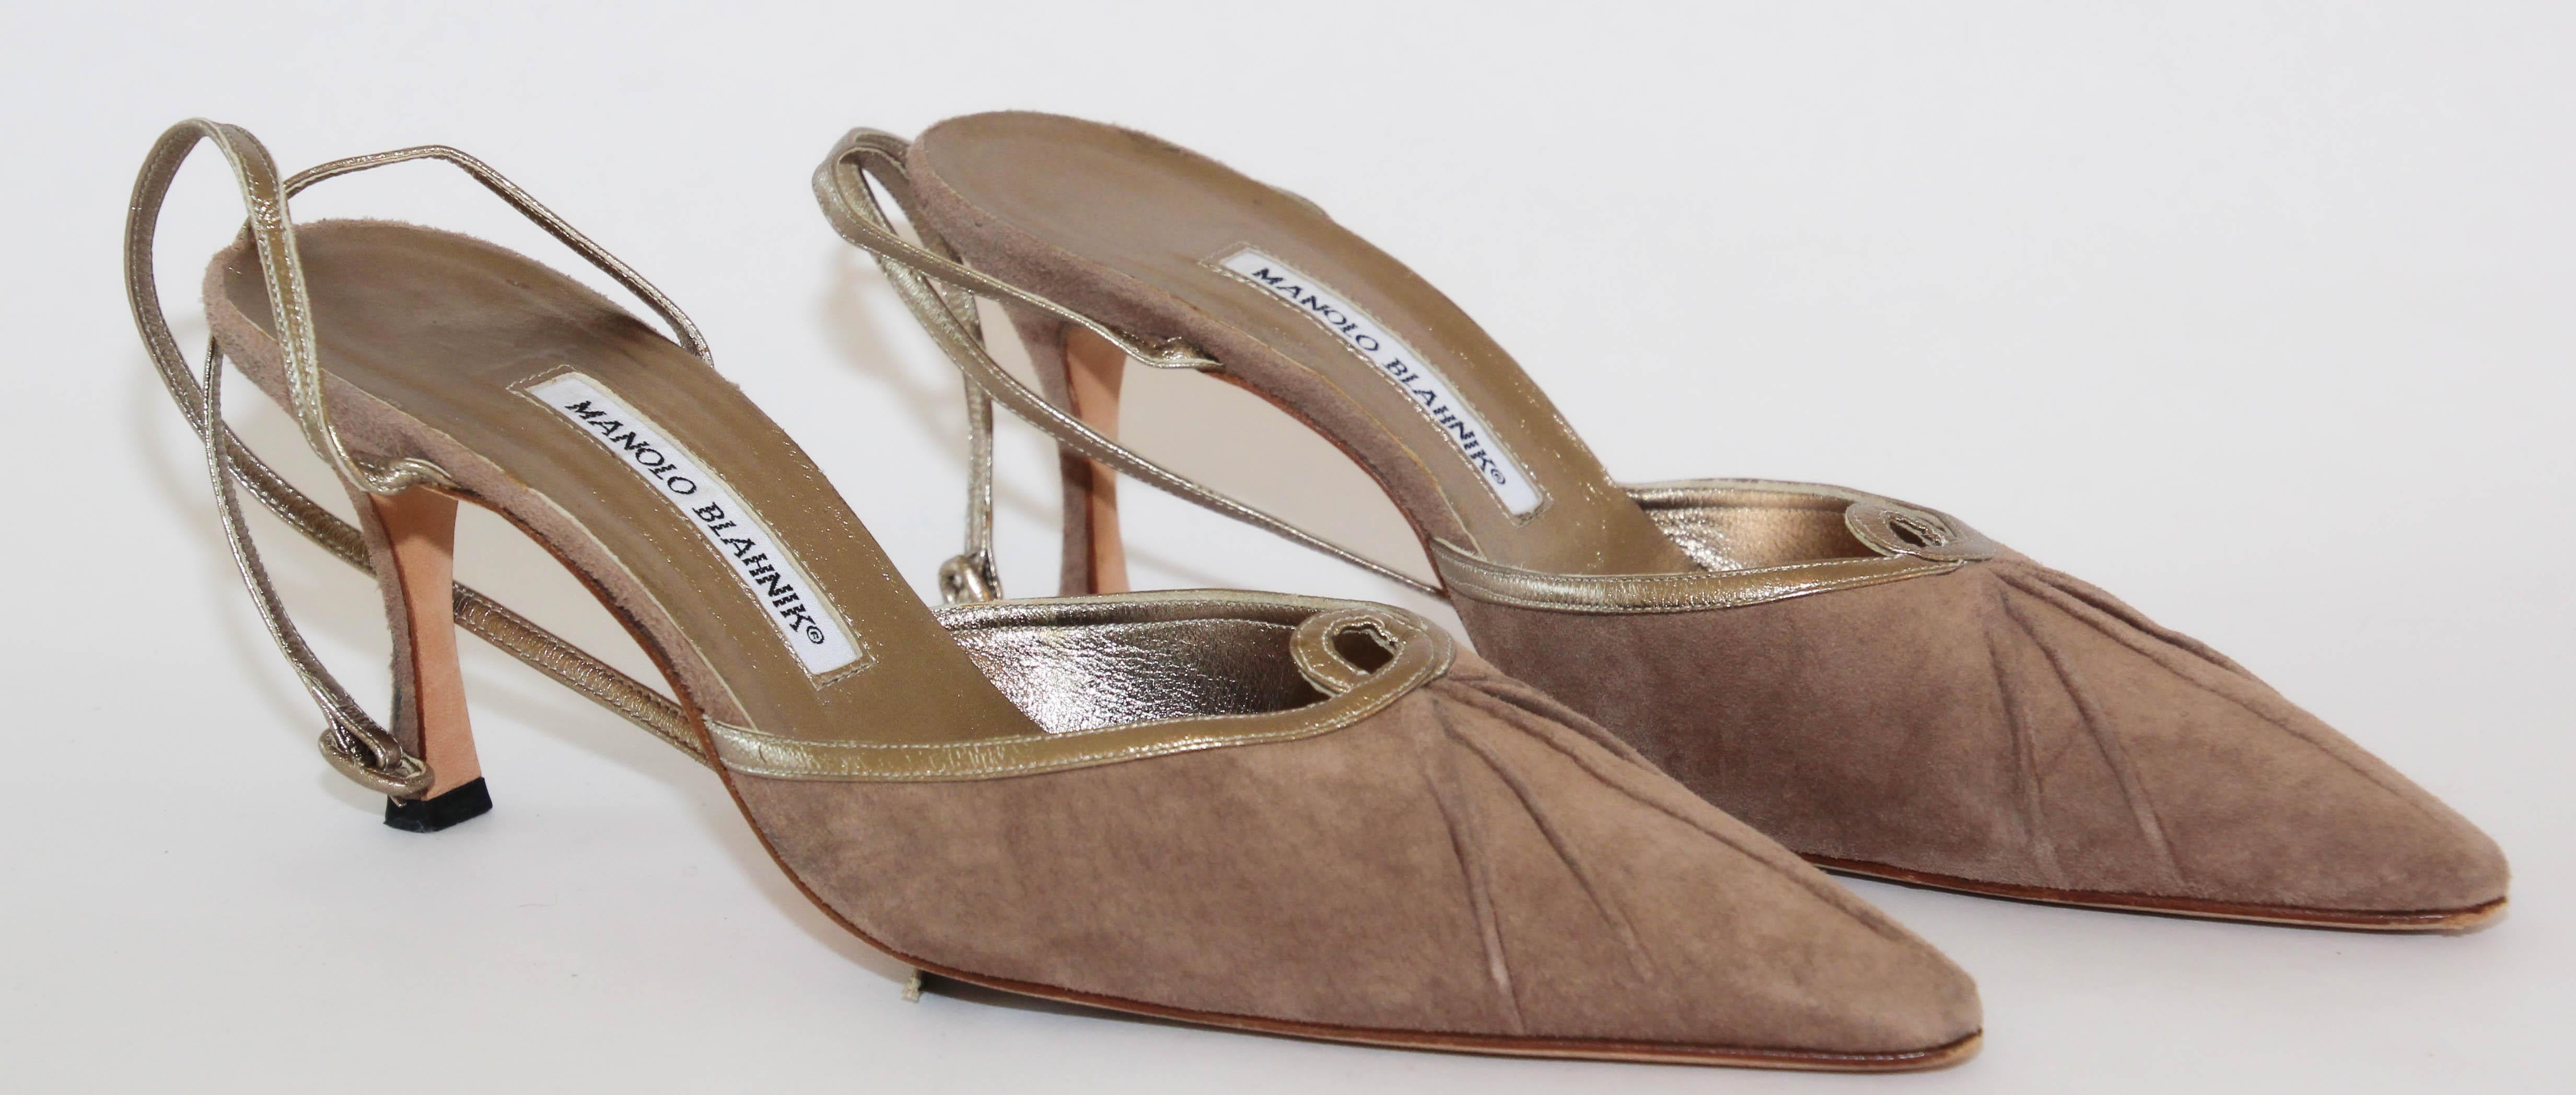 Manolo Blahnik vintage suede shoes with leather ankle straps.
These vintage Manolo Blahnik brownish taupe suede shoes with leather ankle straps at the back of the heels. 
These Manolo Blahnik sling back ankle strap pumps exudes an undeniably